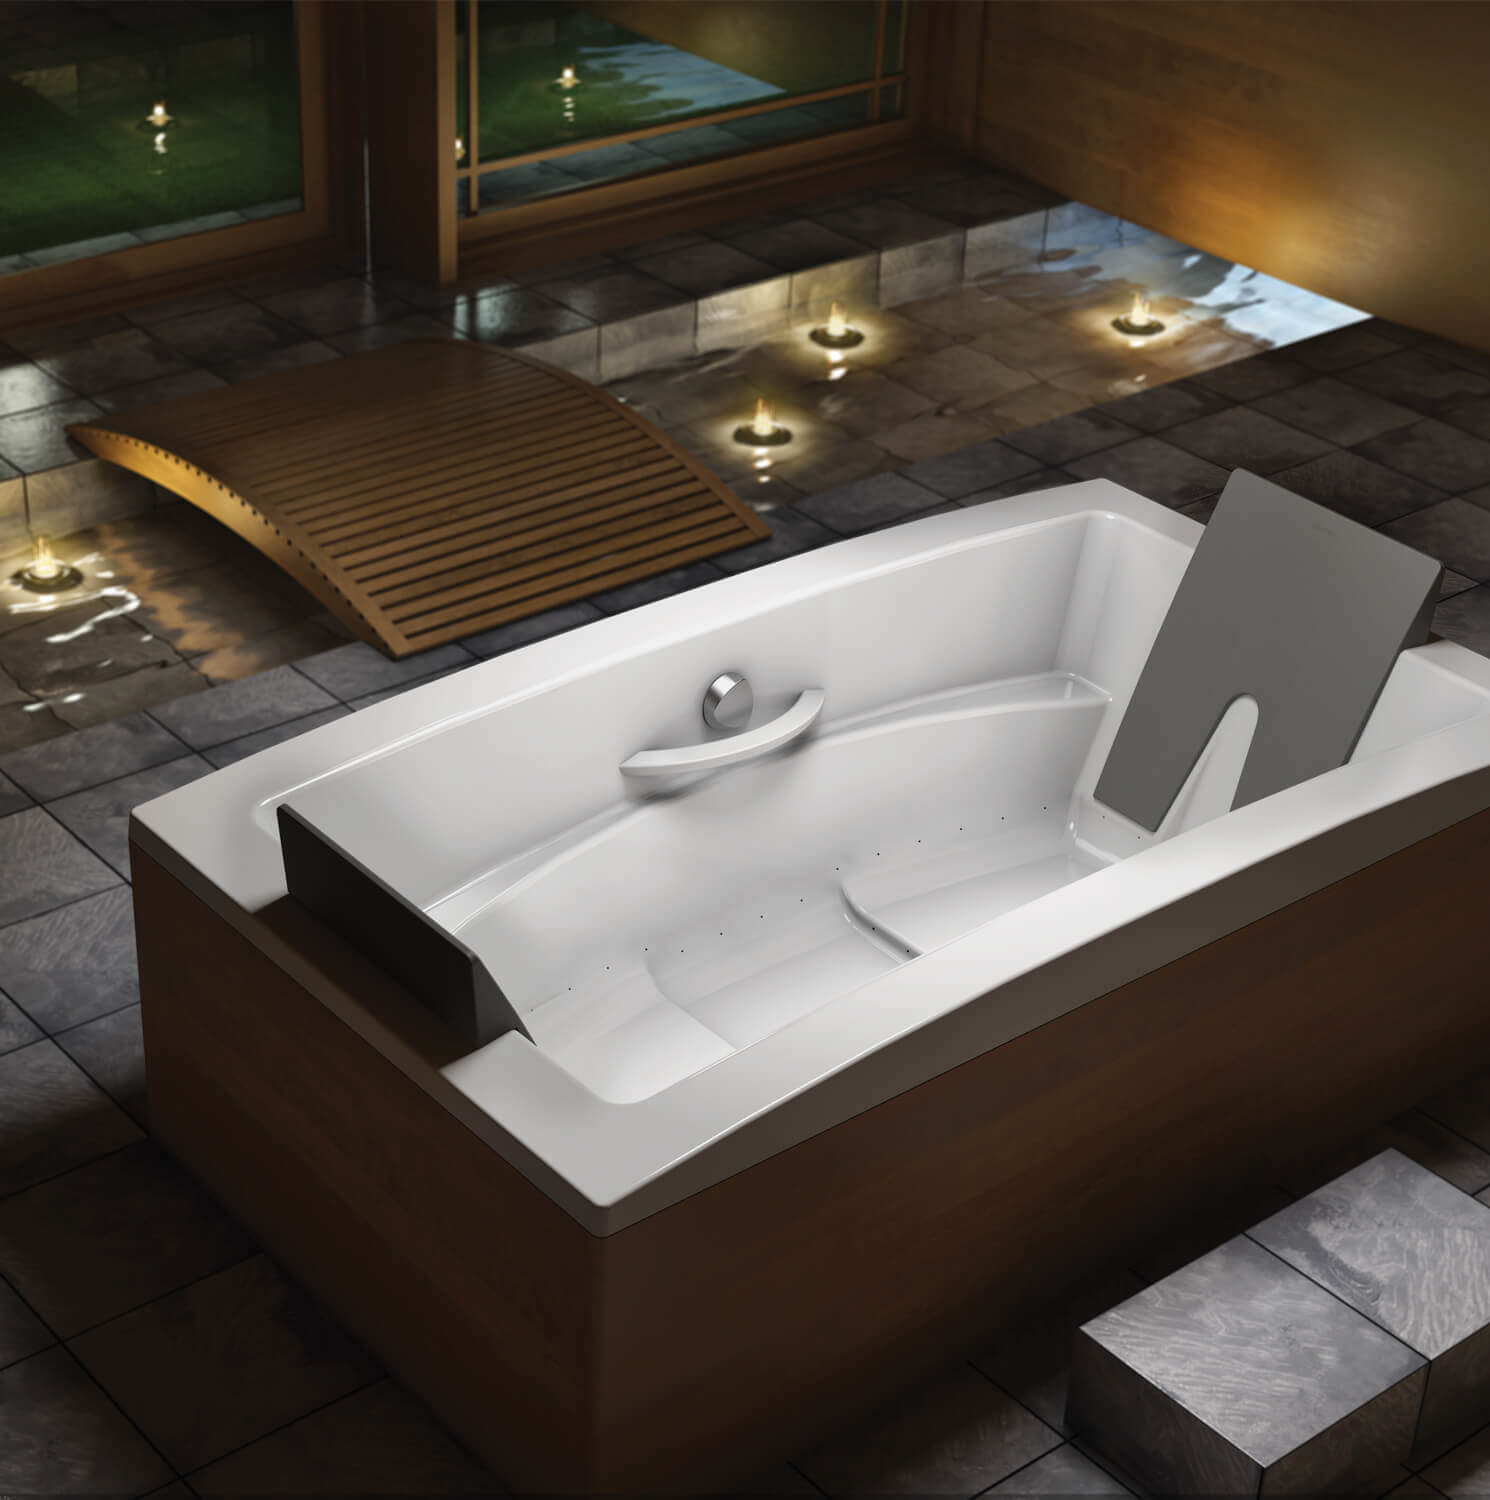 Bainultra Inua® 7240 two person drop-in air jet bathtub for your modern bathroom